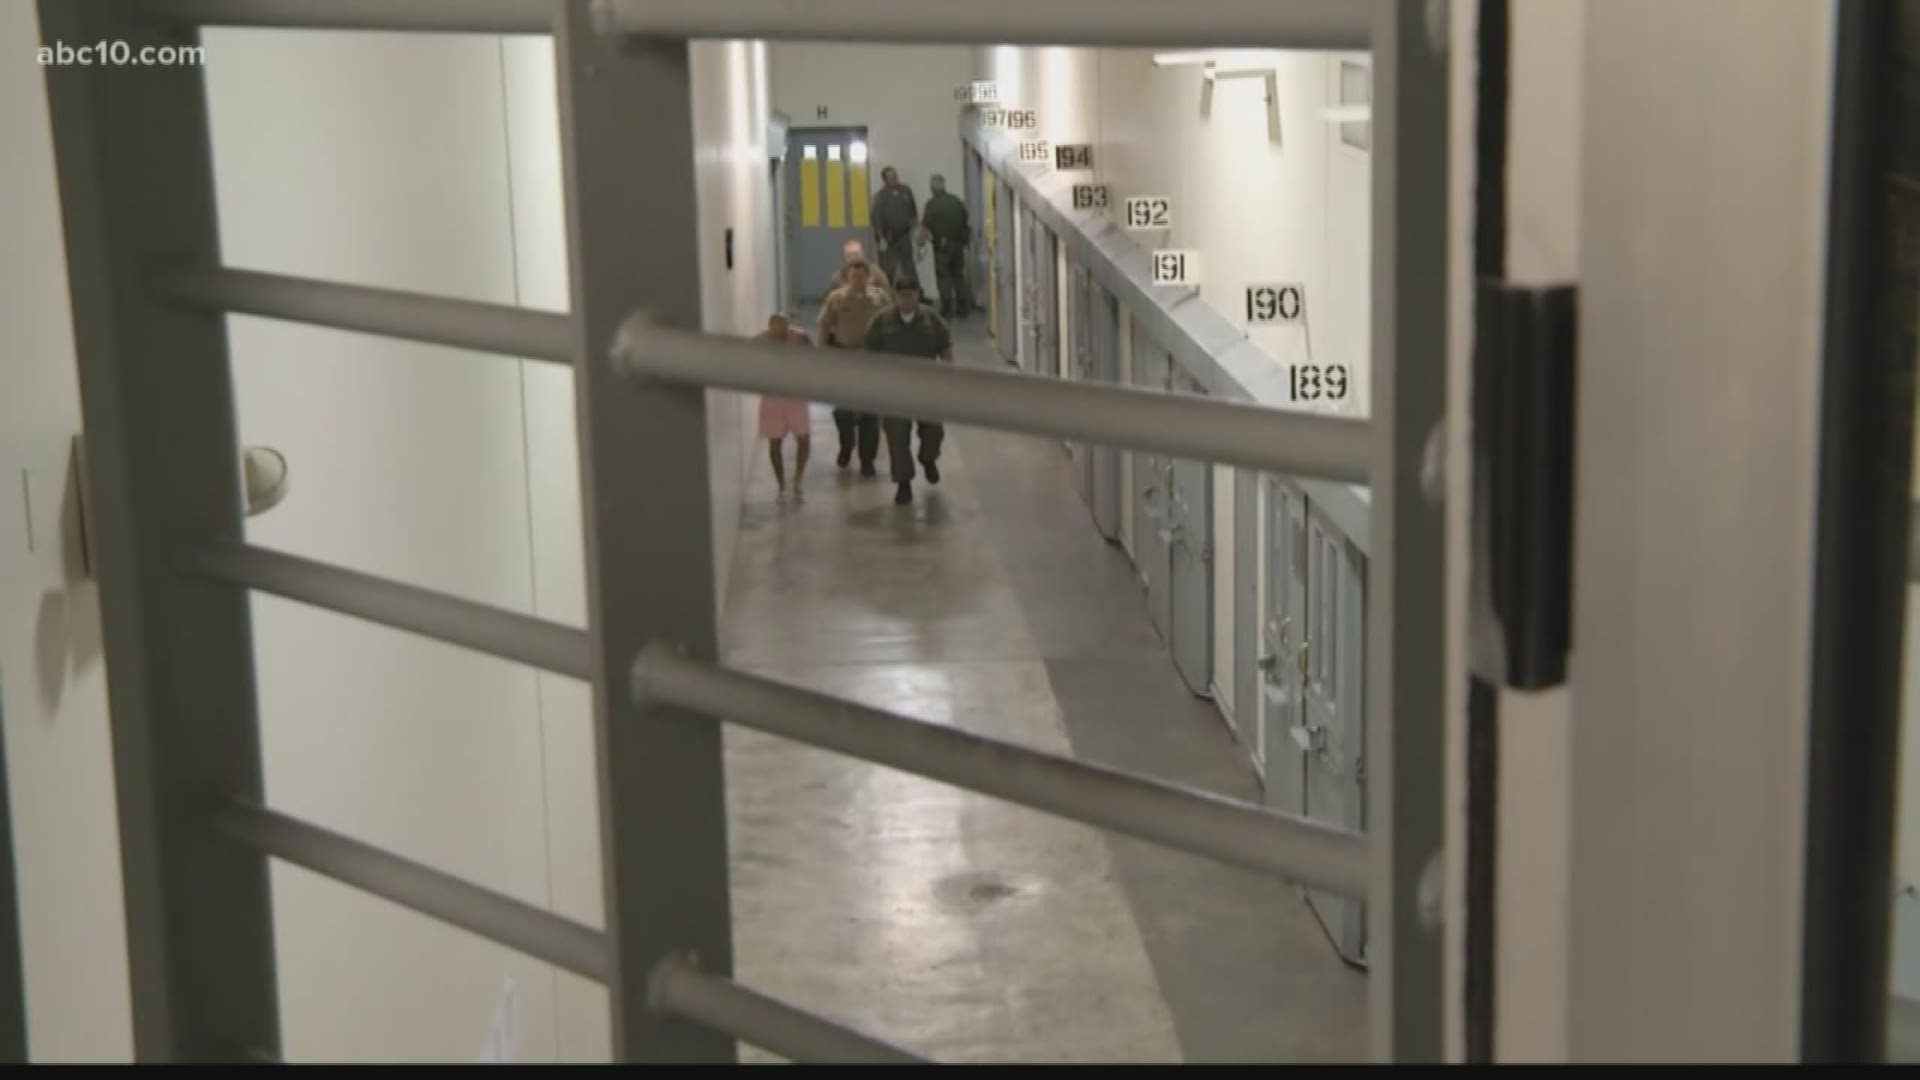 Another bill making its way through the state assembly could lead to shorter prison terms for inmates.